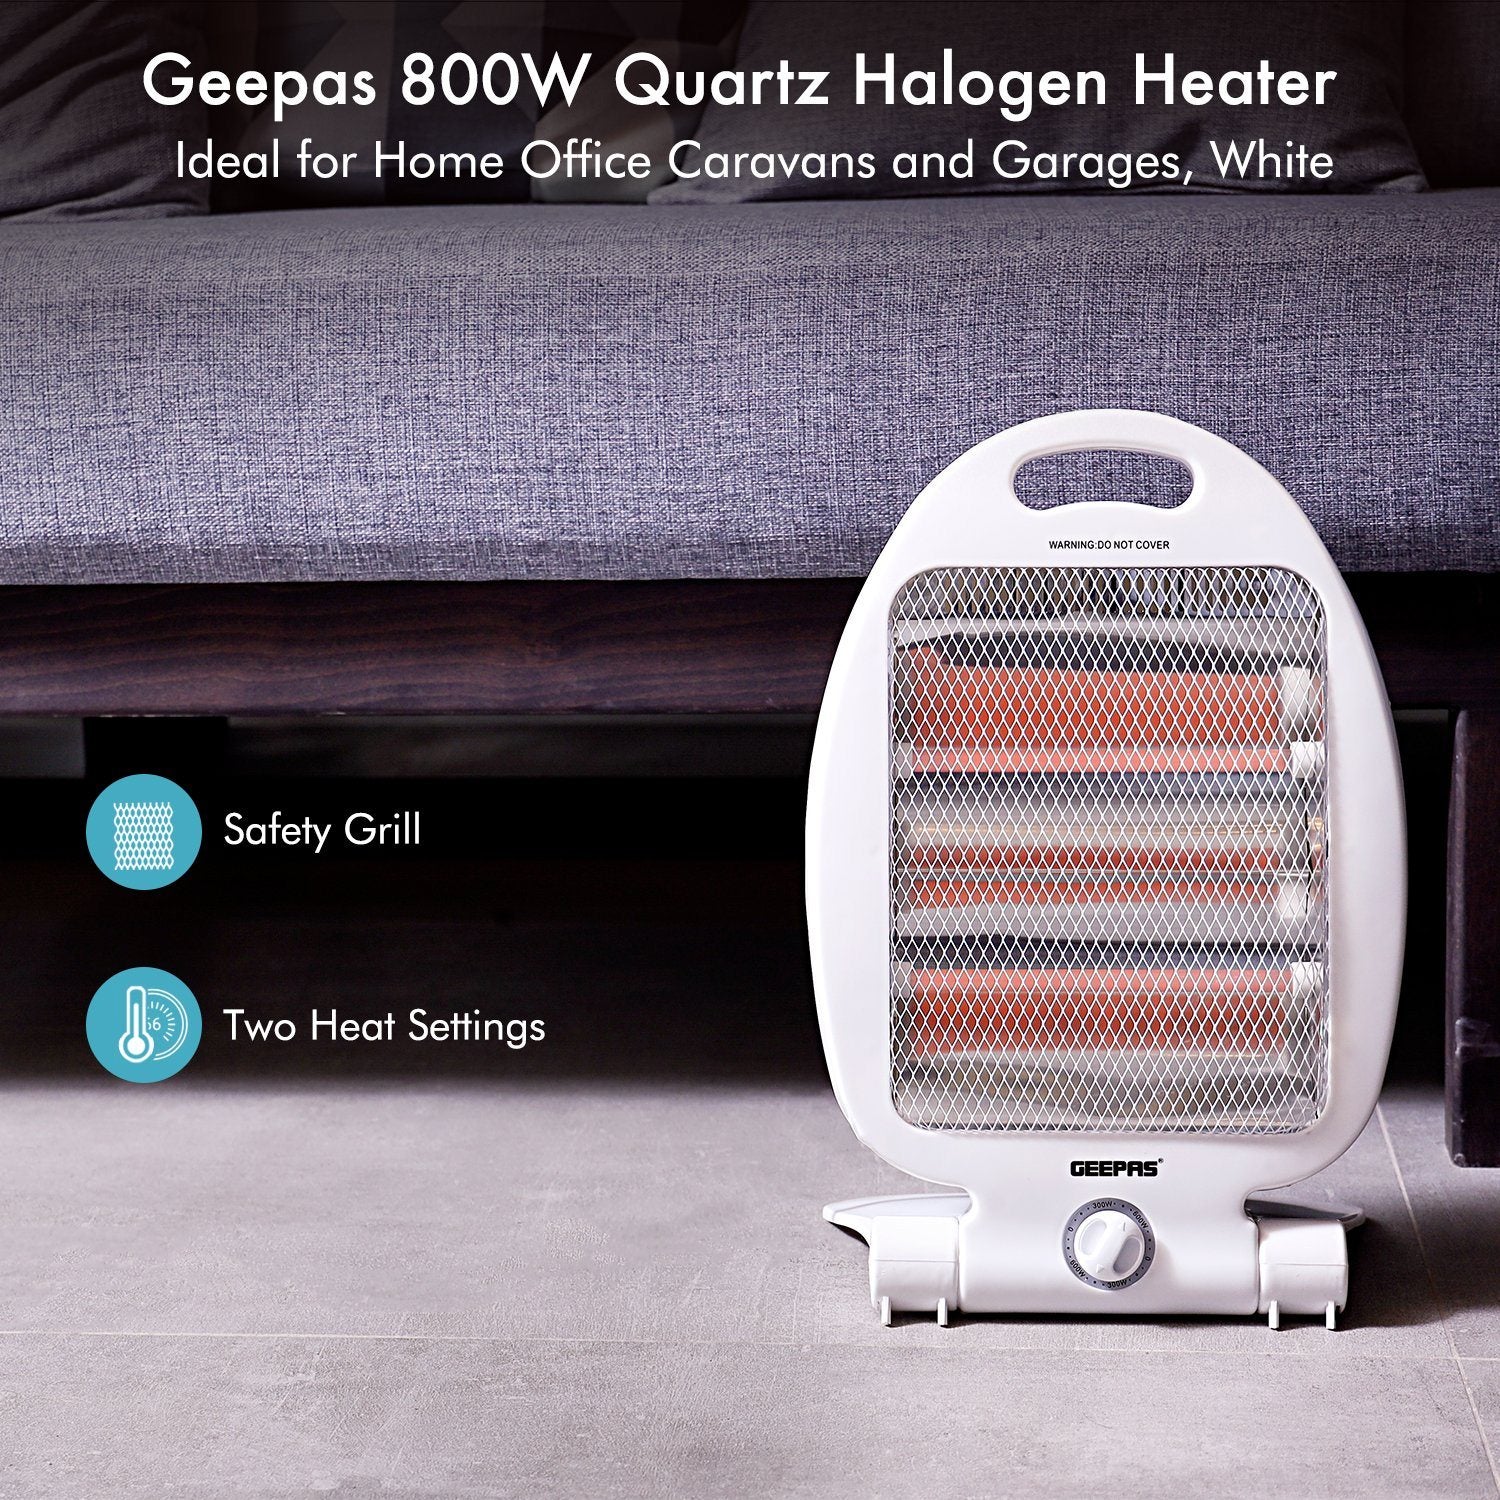 800W Quartz Halogen Heater Heaters Geepas | For you. For life. 